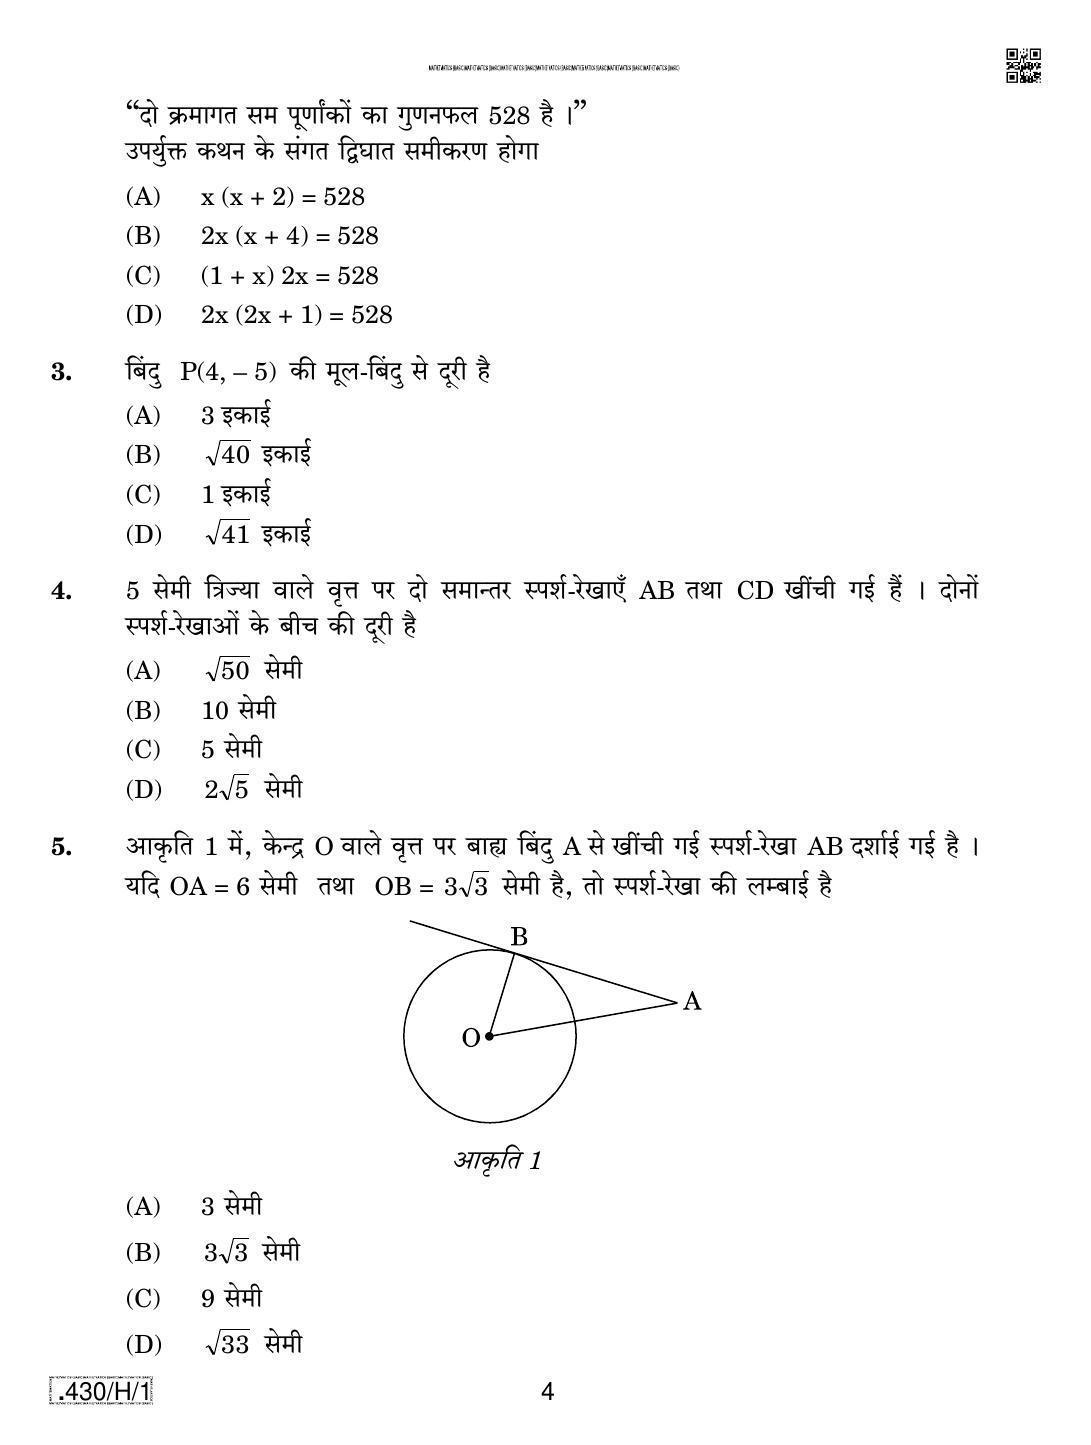 CBSE Class 10 430-C-1 - Maths (Basic) 2020 Compartment Question Paper - Page 4